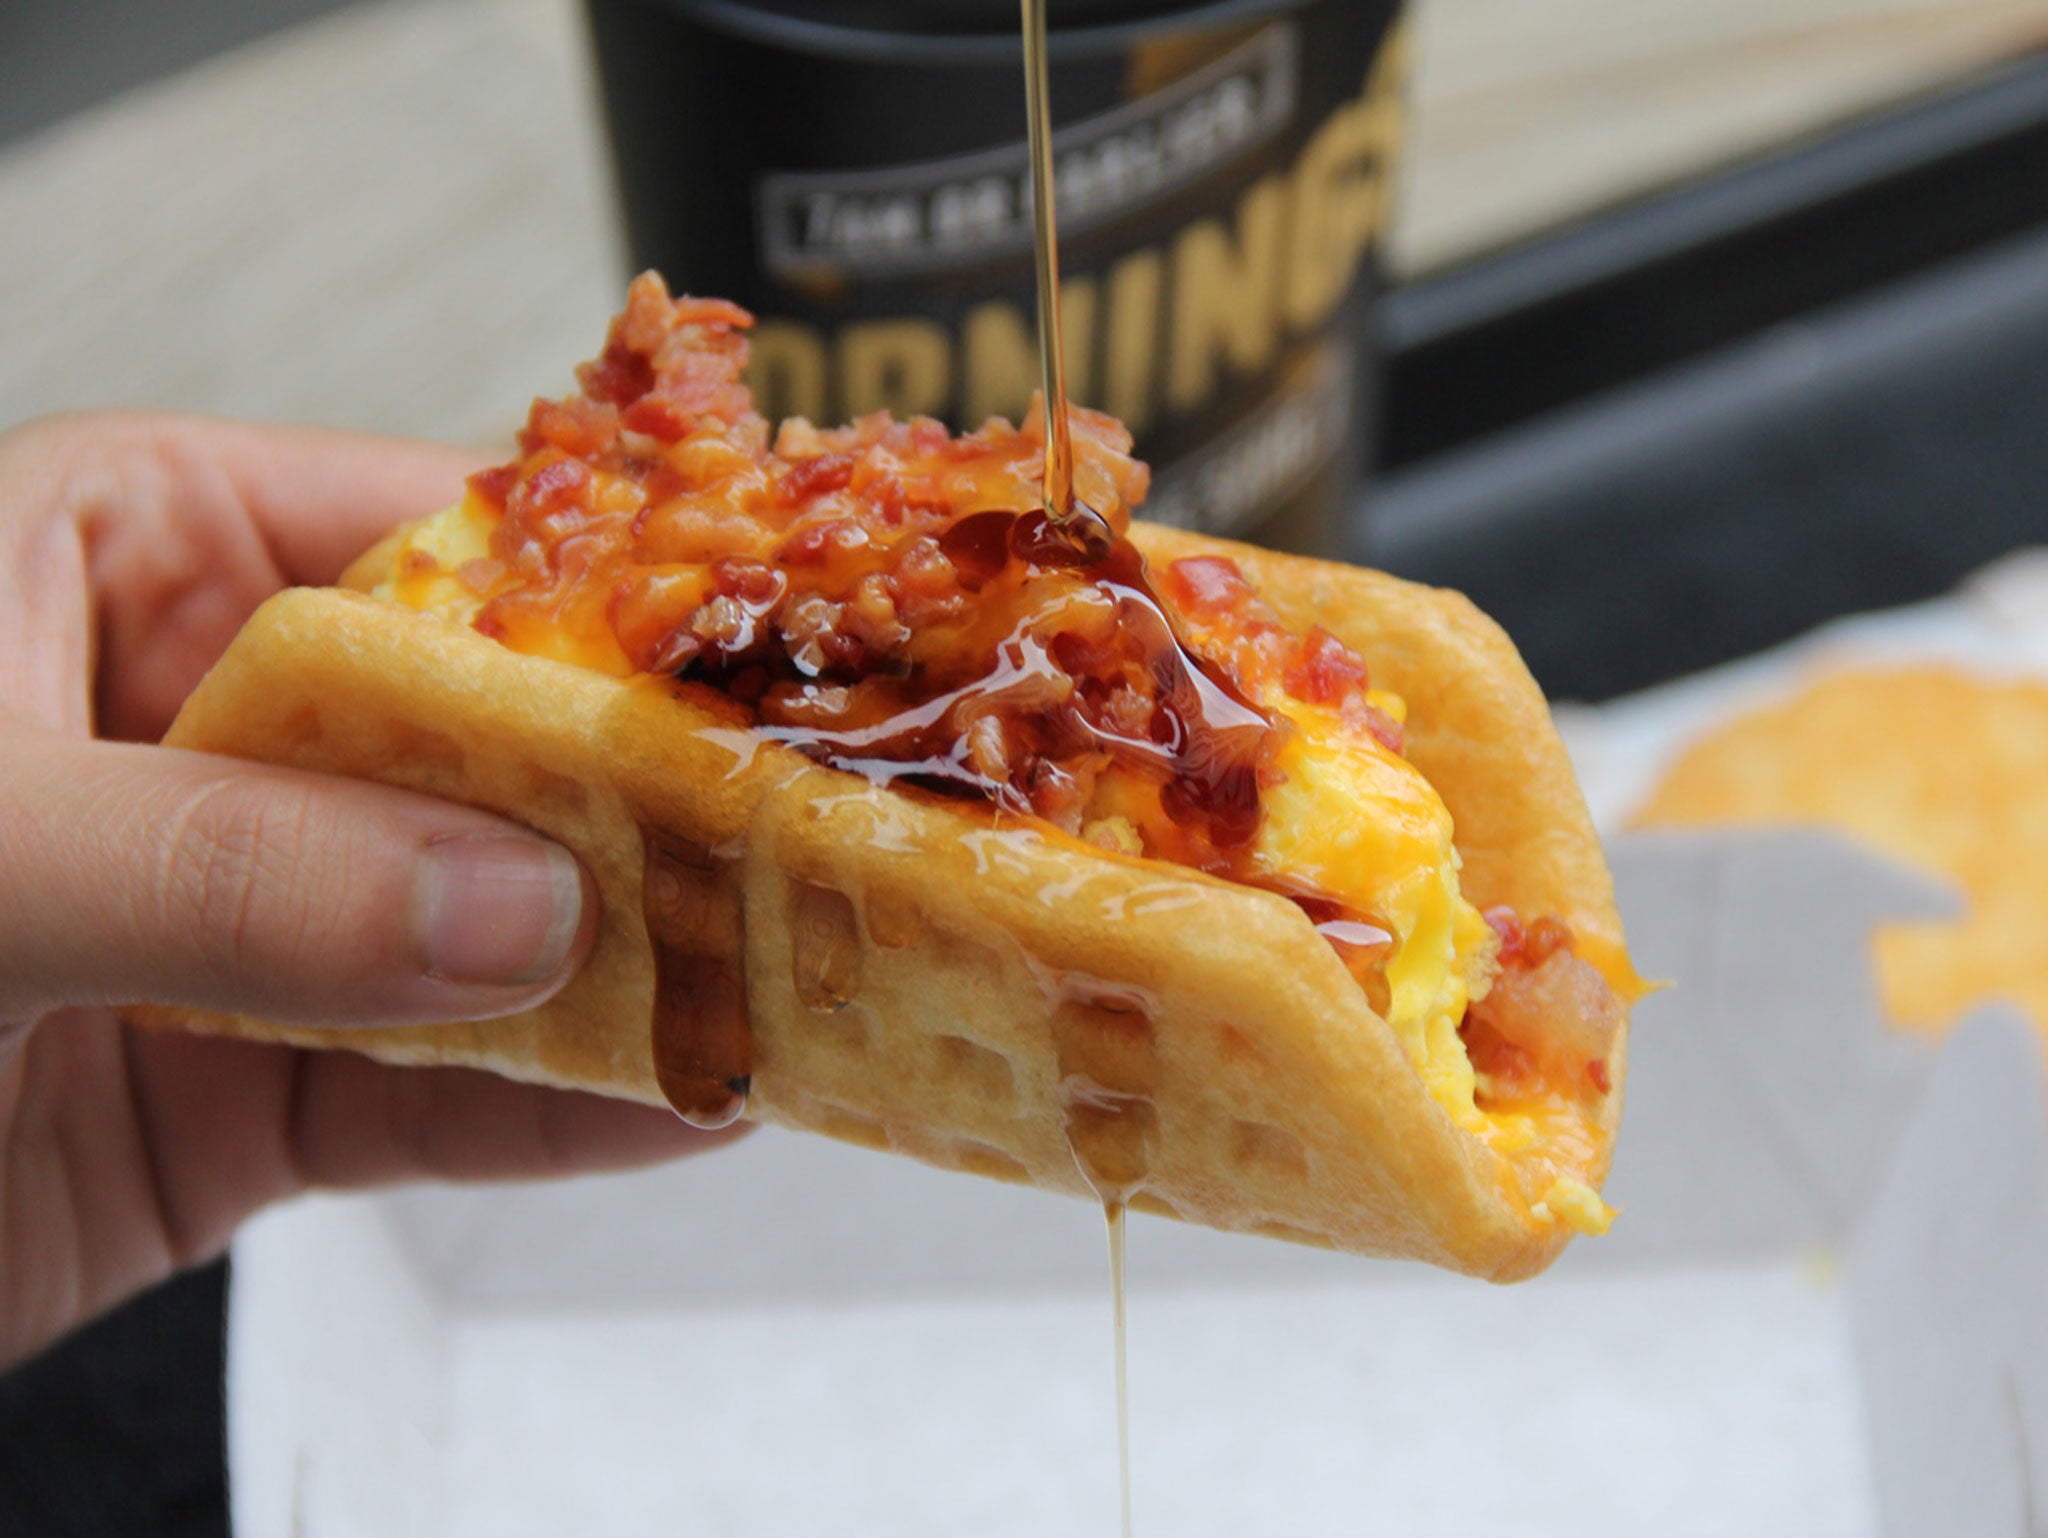 The Taco Waffle: "a warm waffle wrapped around a hearty sausage patty or flavorful bacon, with fluffy scrambled eggs and cheese, and served with a side of sweet syrup."